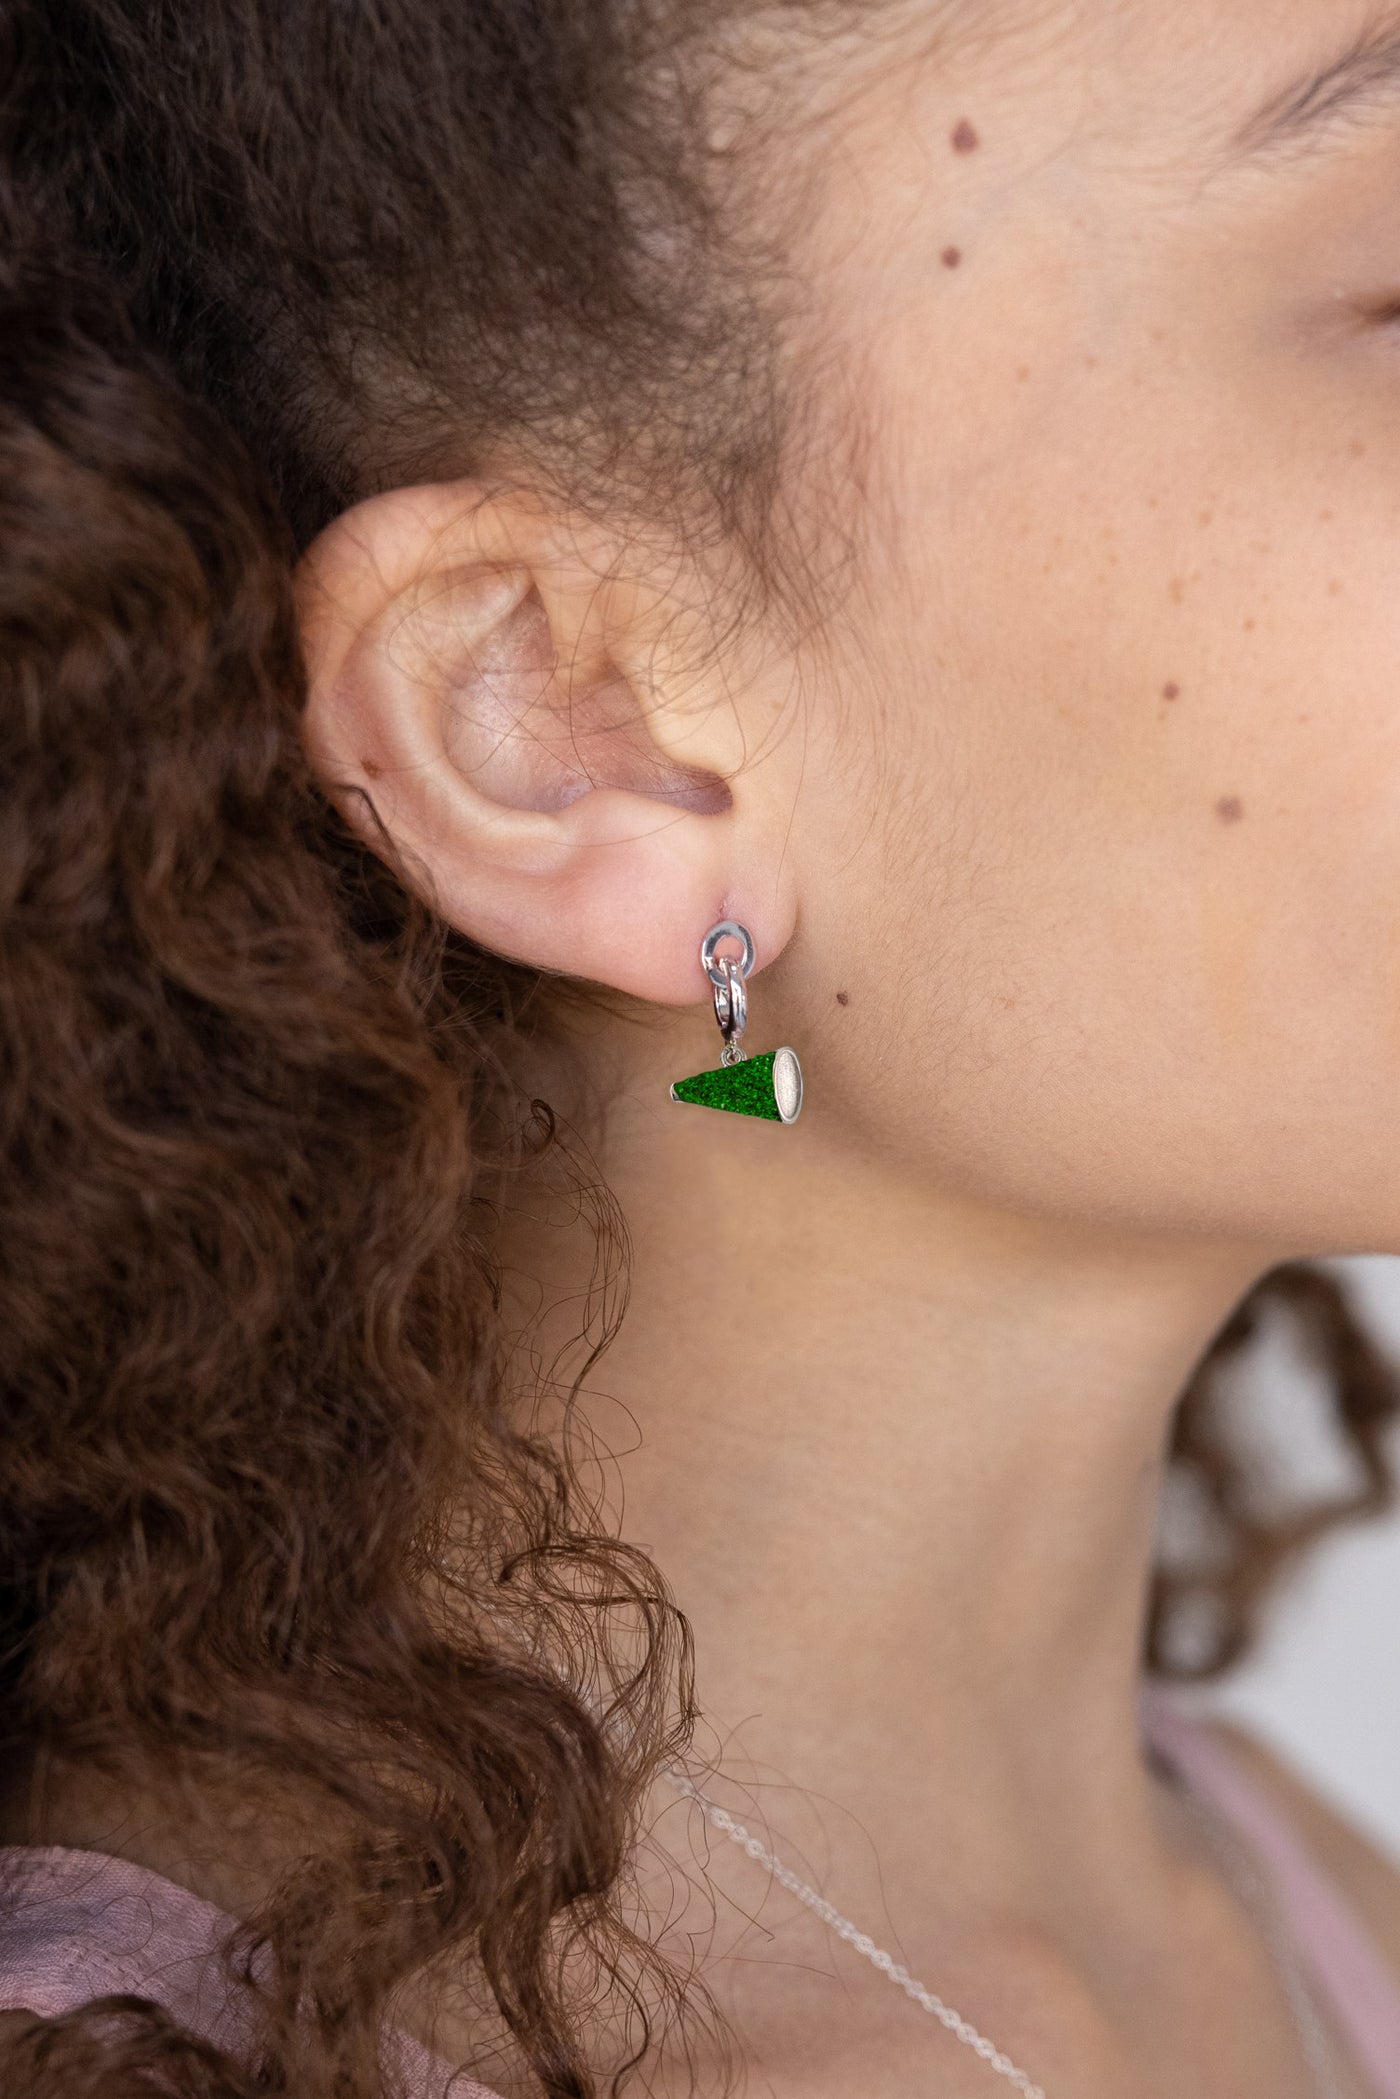 Cheer Megaphone Crystal Sterling Silver Charm in Emerald | Annie and Sisters